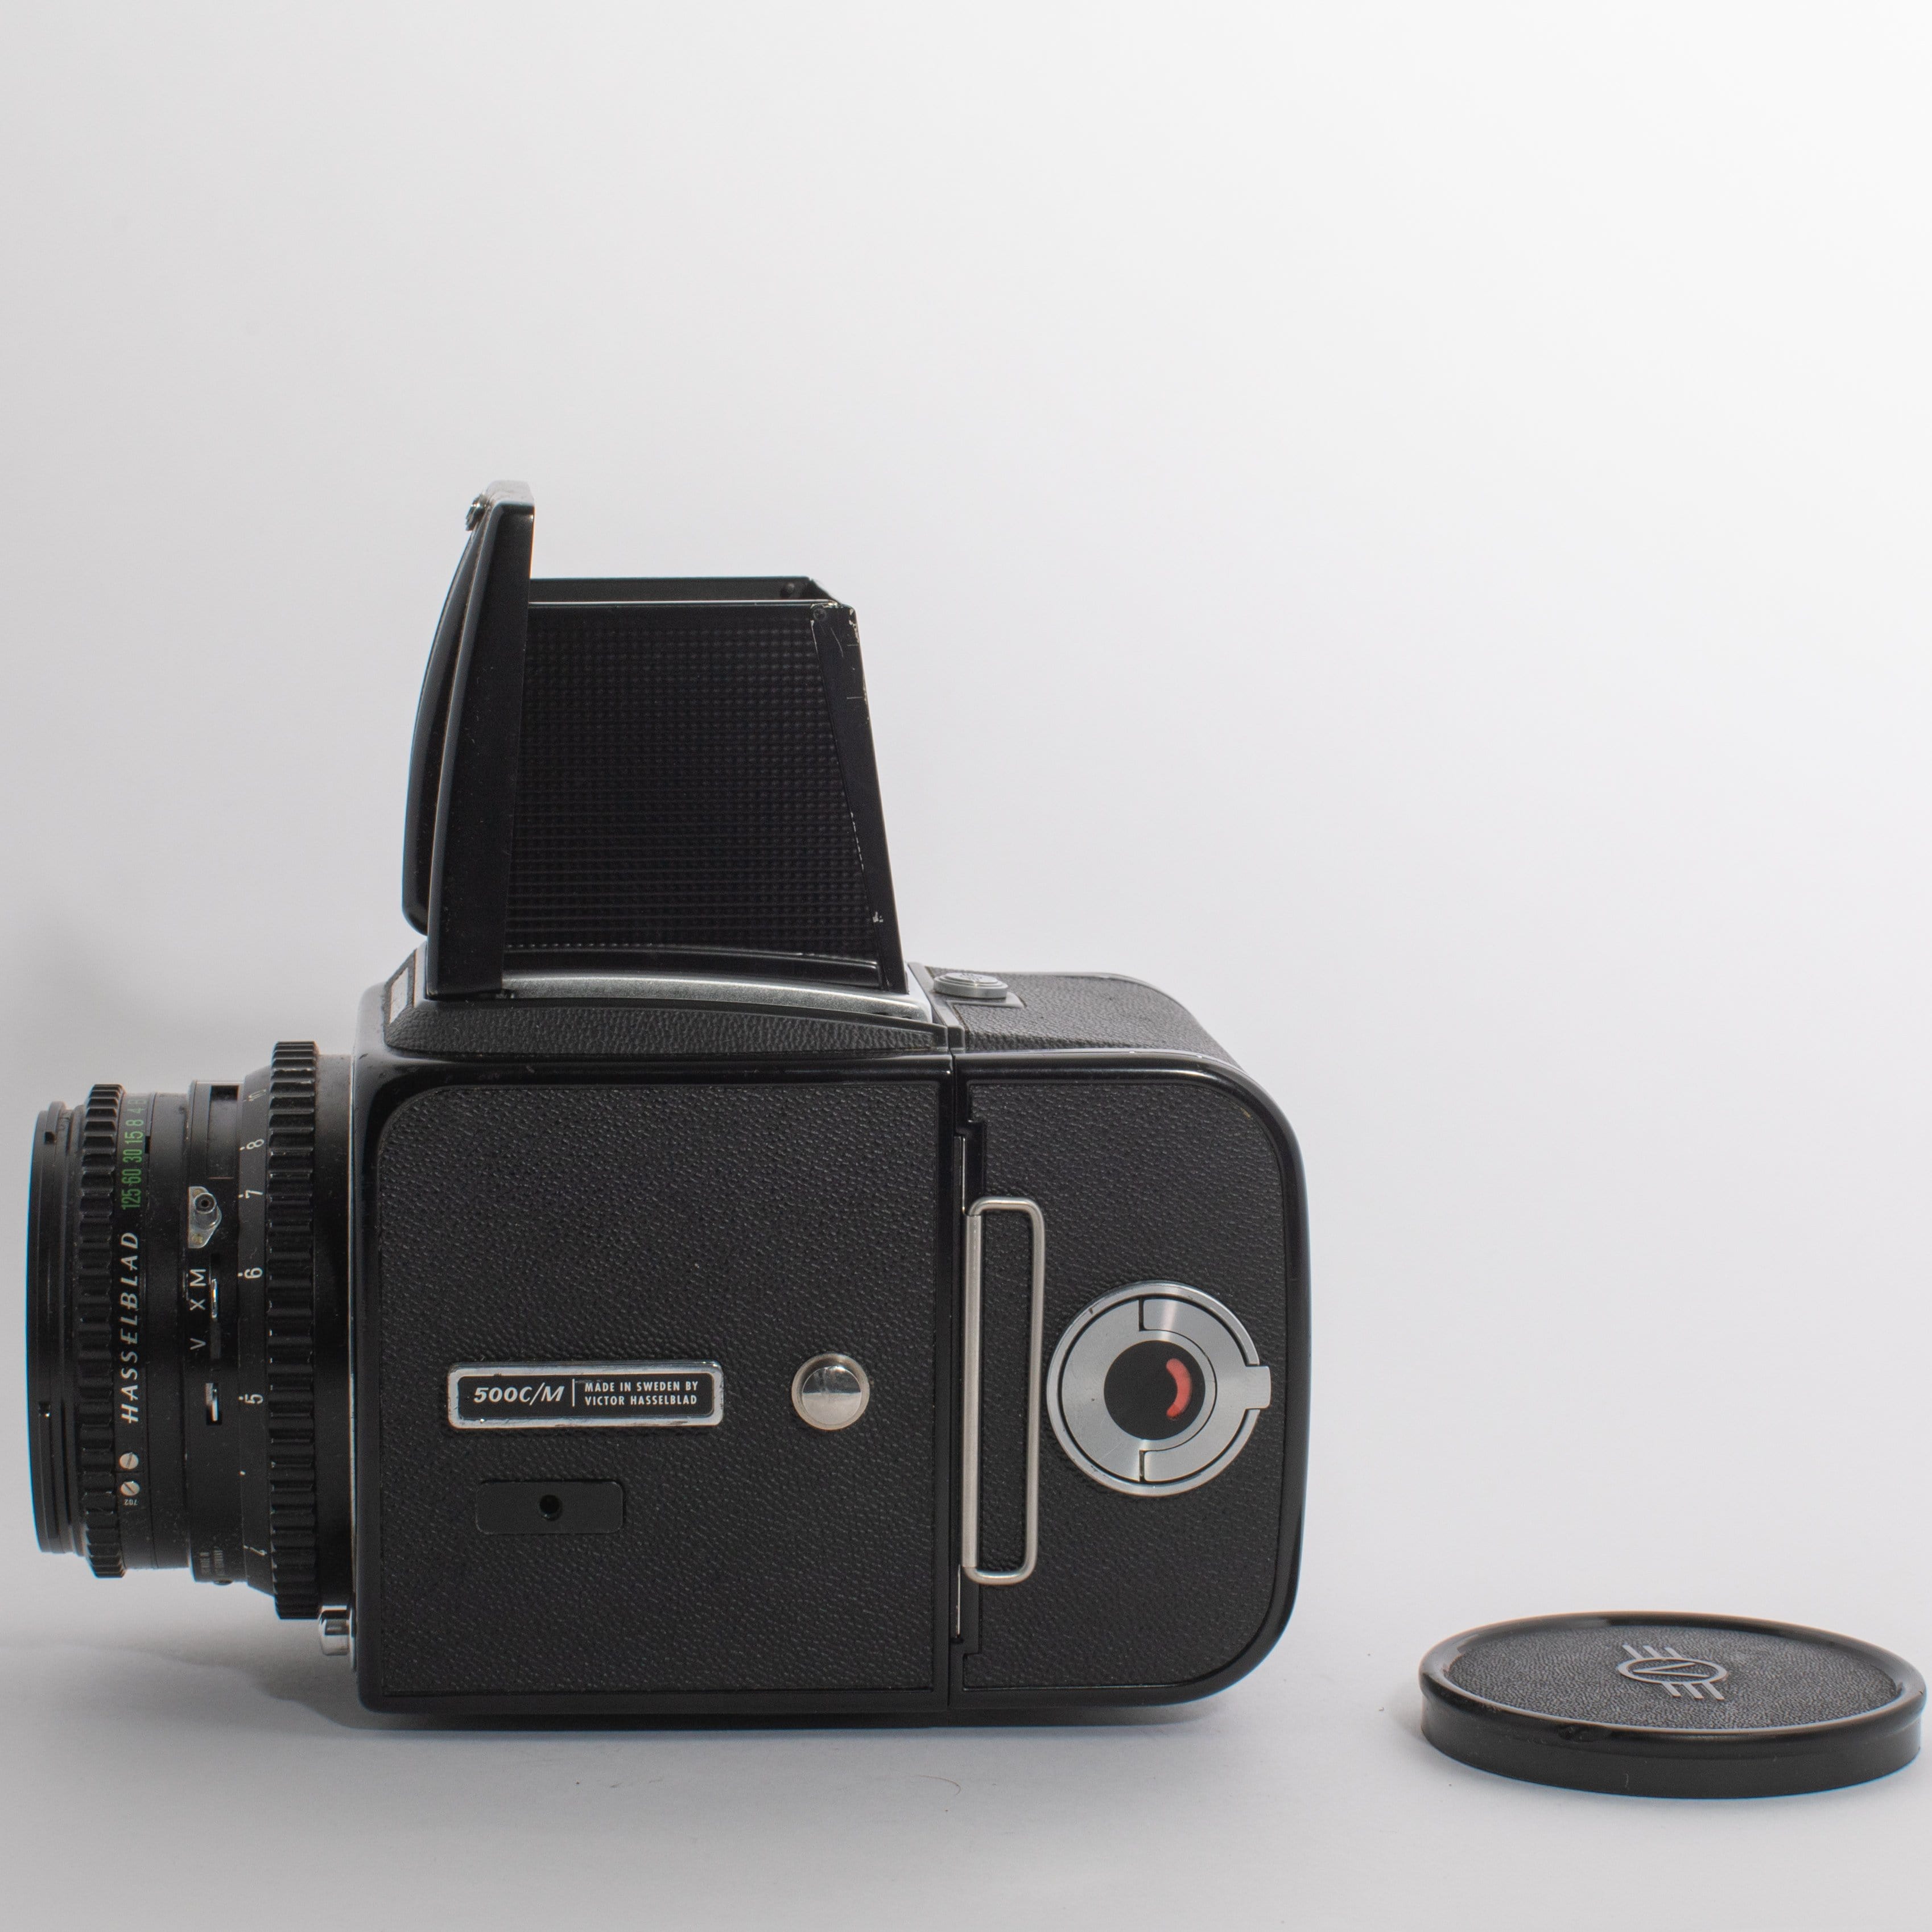 Hasselblad 500C/M Black with a Carl Zeiss 80mm Planar 2.8 Lens 